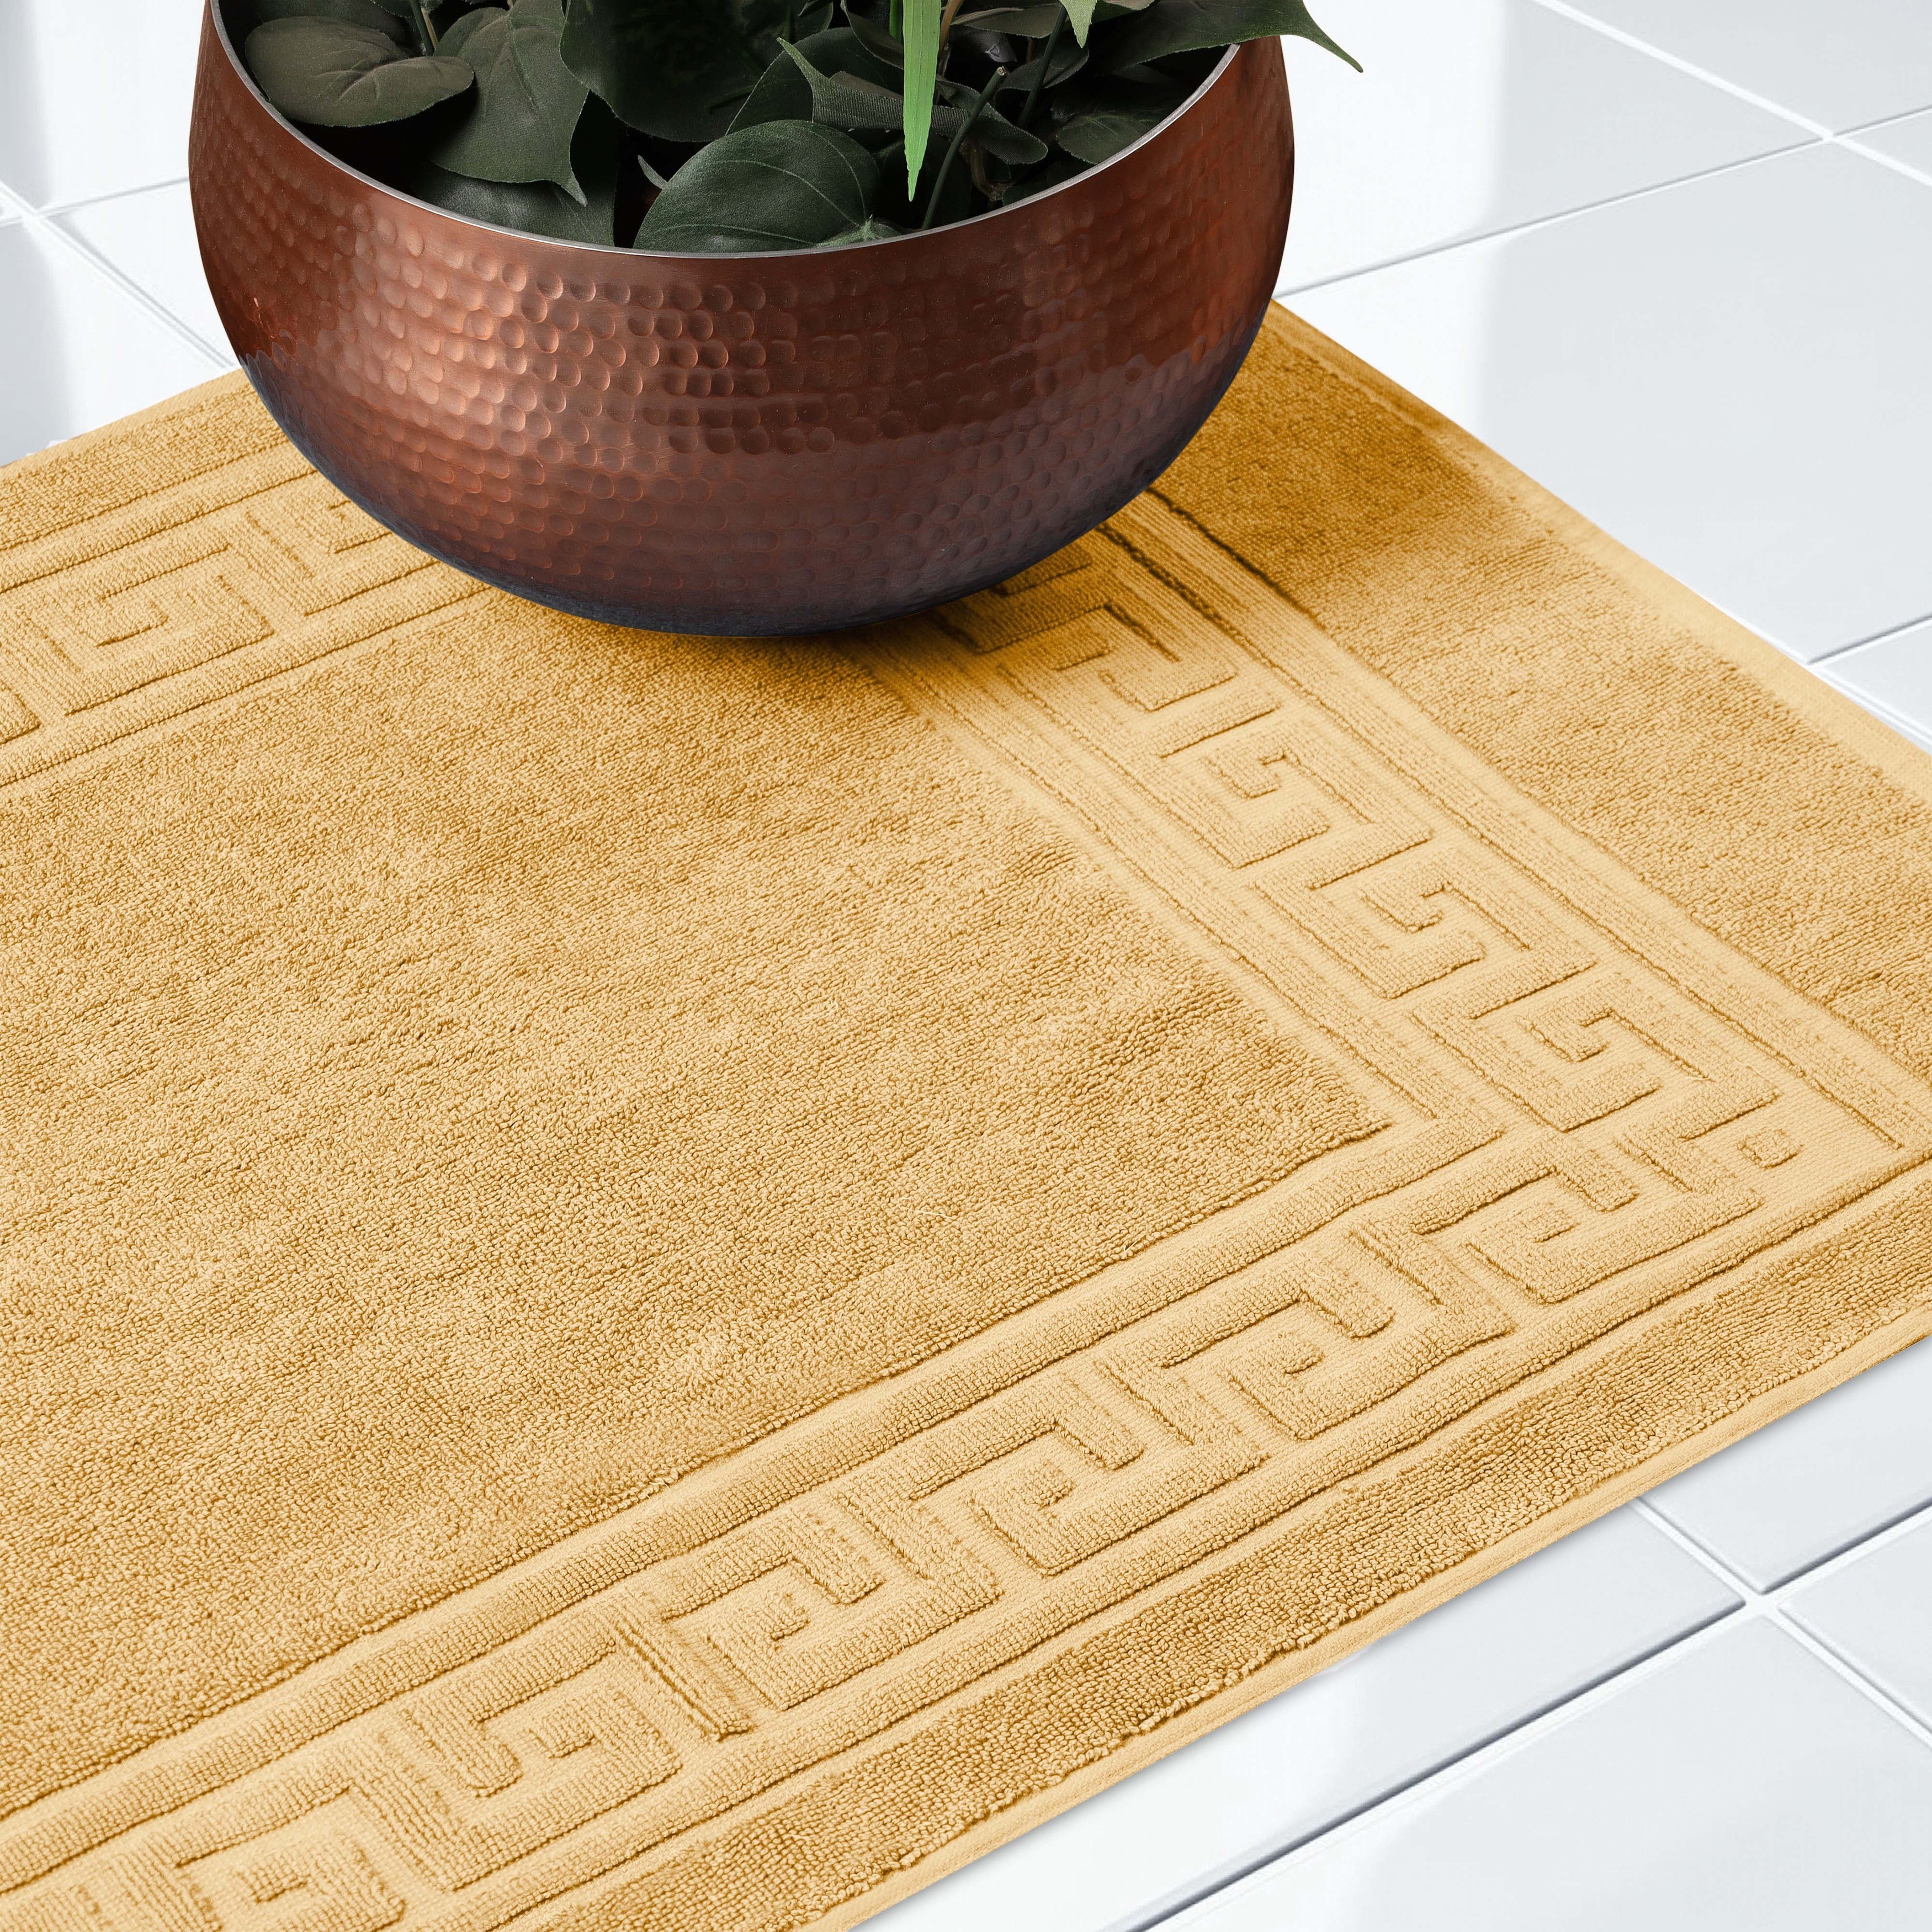 Bath Mat 1350GSM Pure Cotton Thick Soft Absorbent by Ample Decor - Bed Bath  & Beyond - 34199008